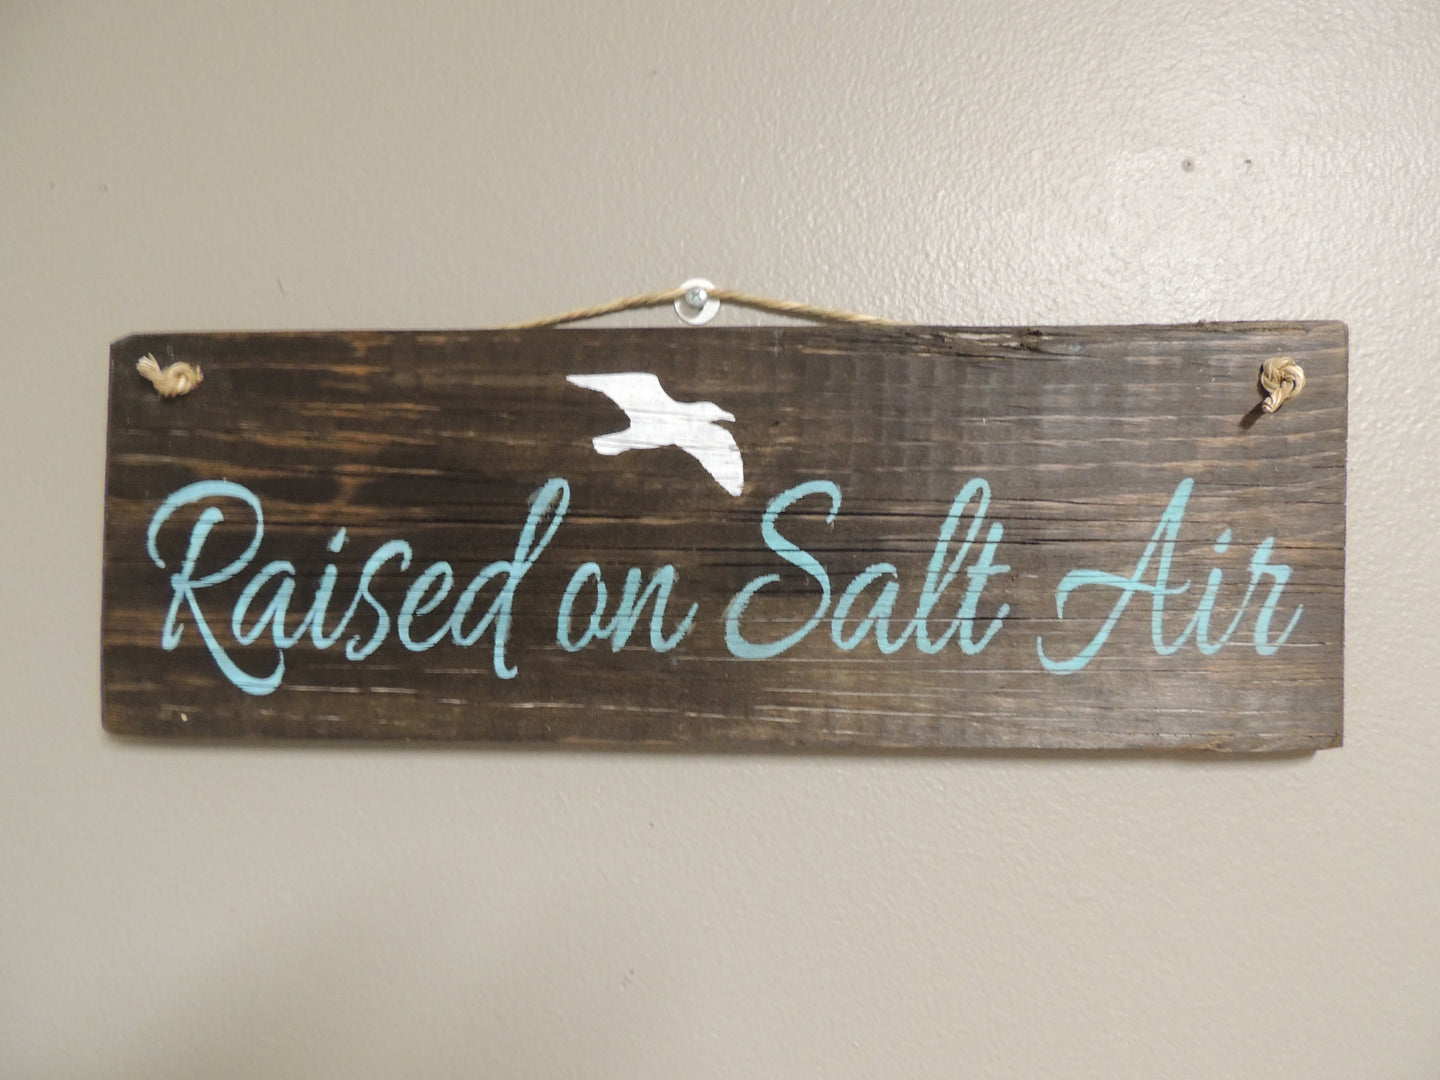 Raised on Salt Air sign in Mahogany stain white seagull and turquoise wording